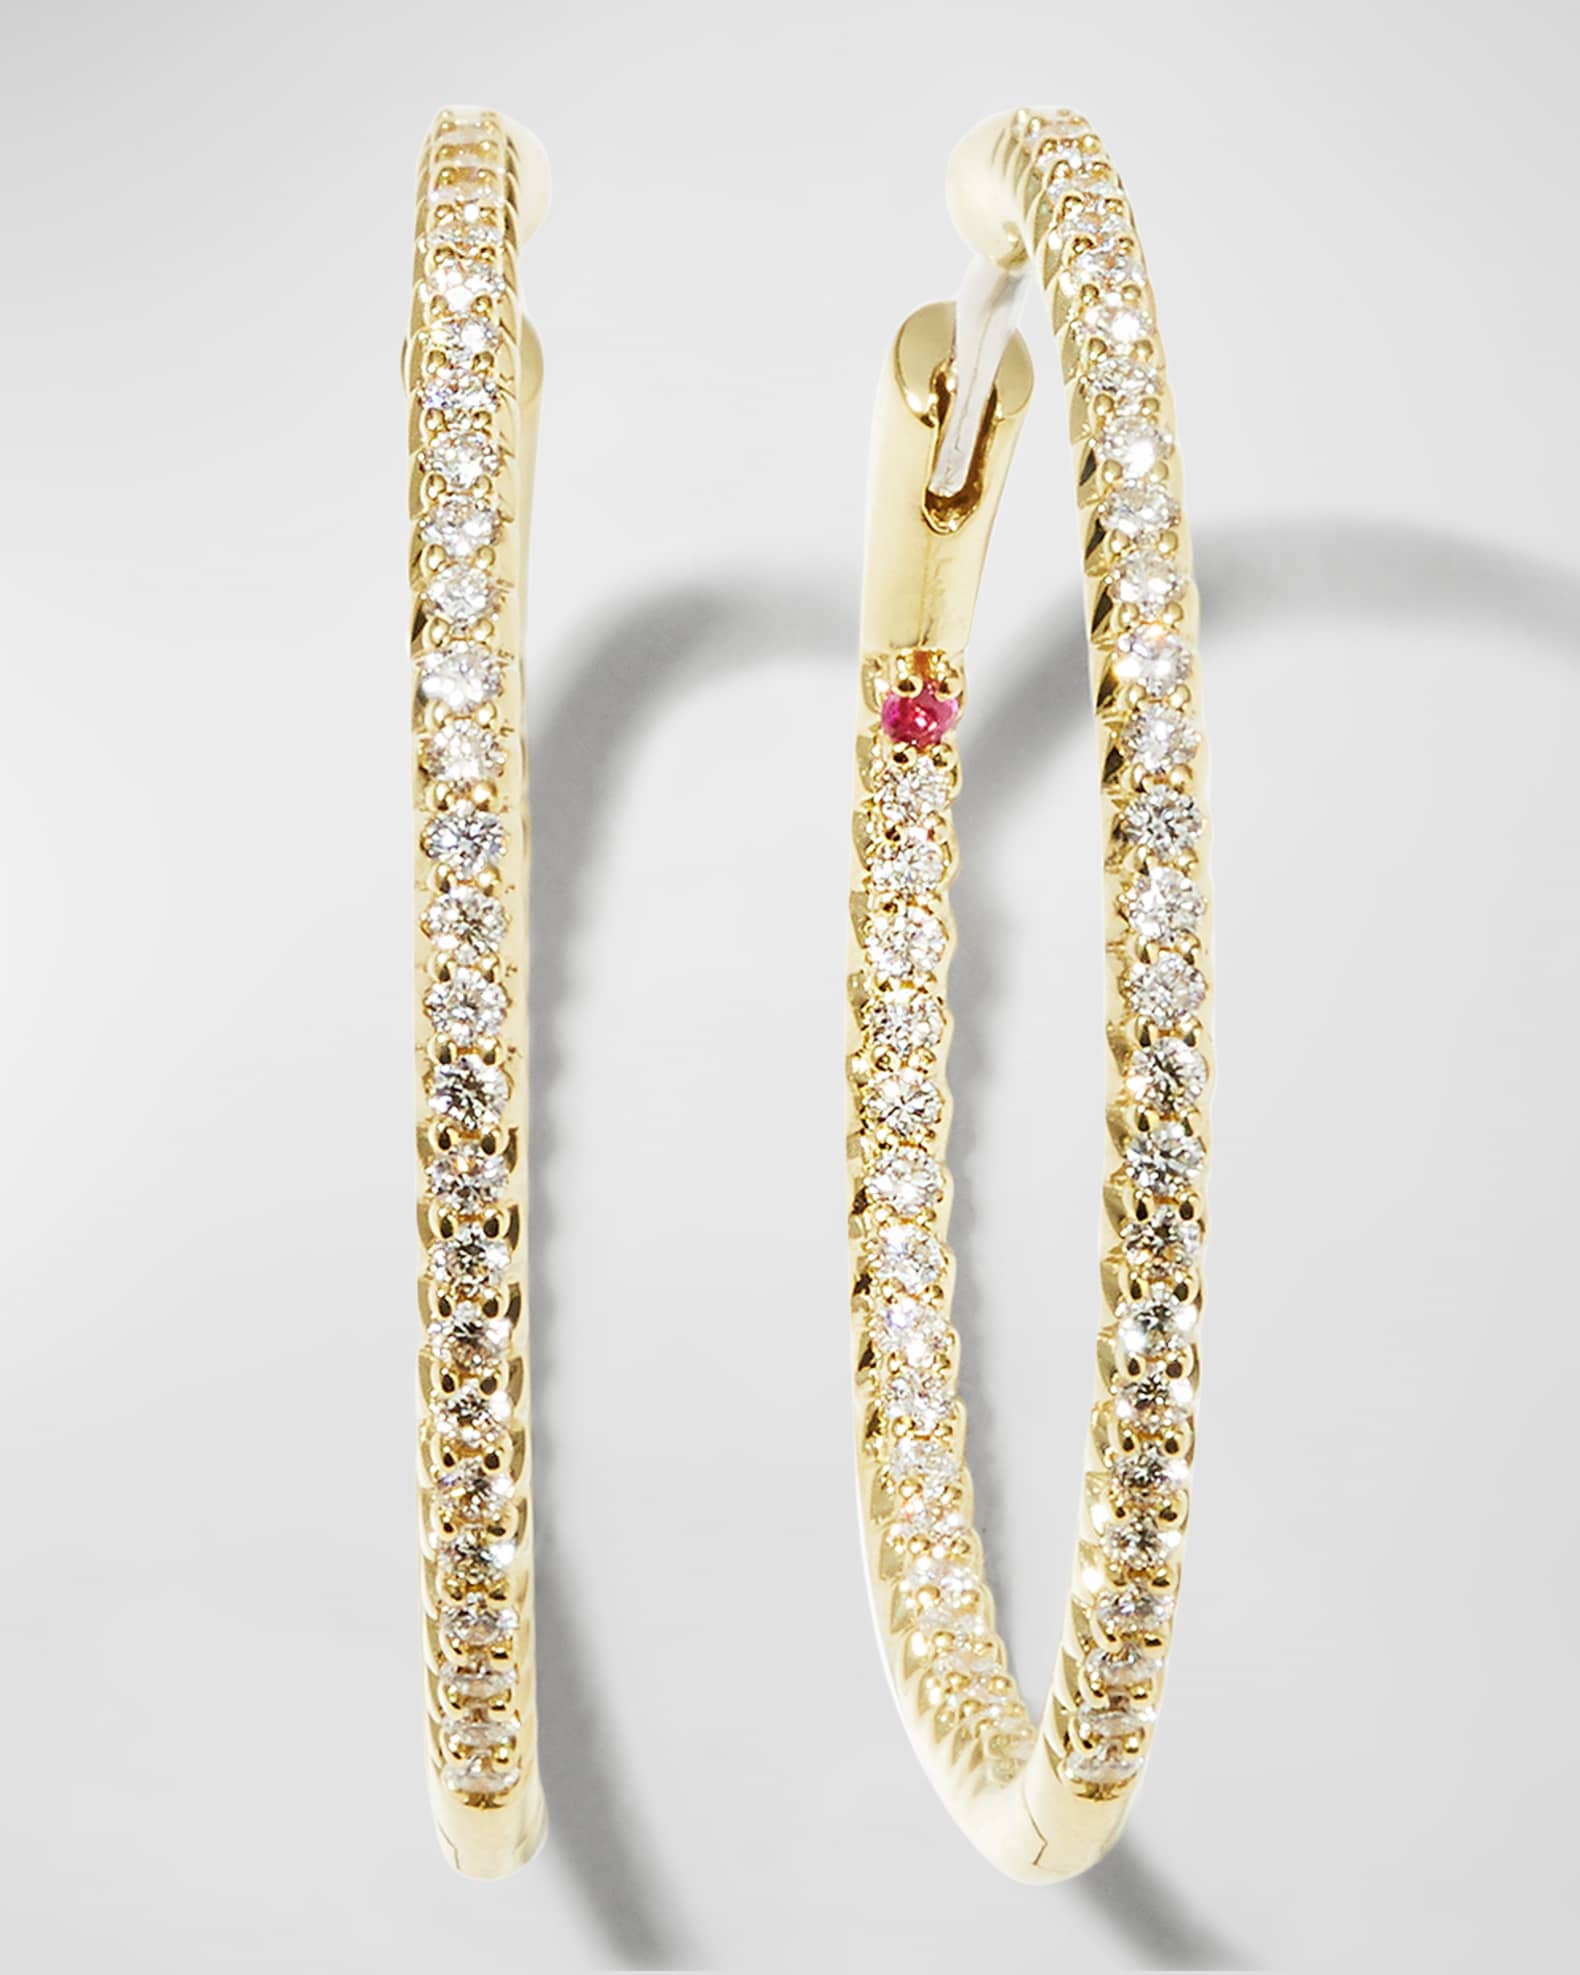 Louis Vuitton Hoop Earrings in Yellow Gold and Quartz